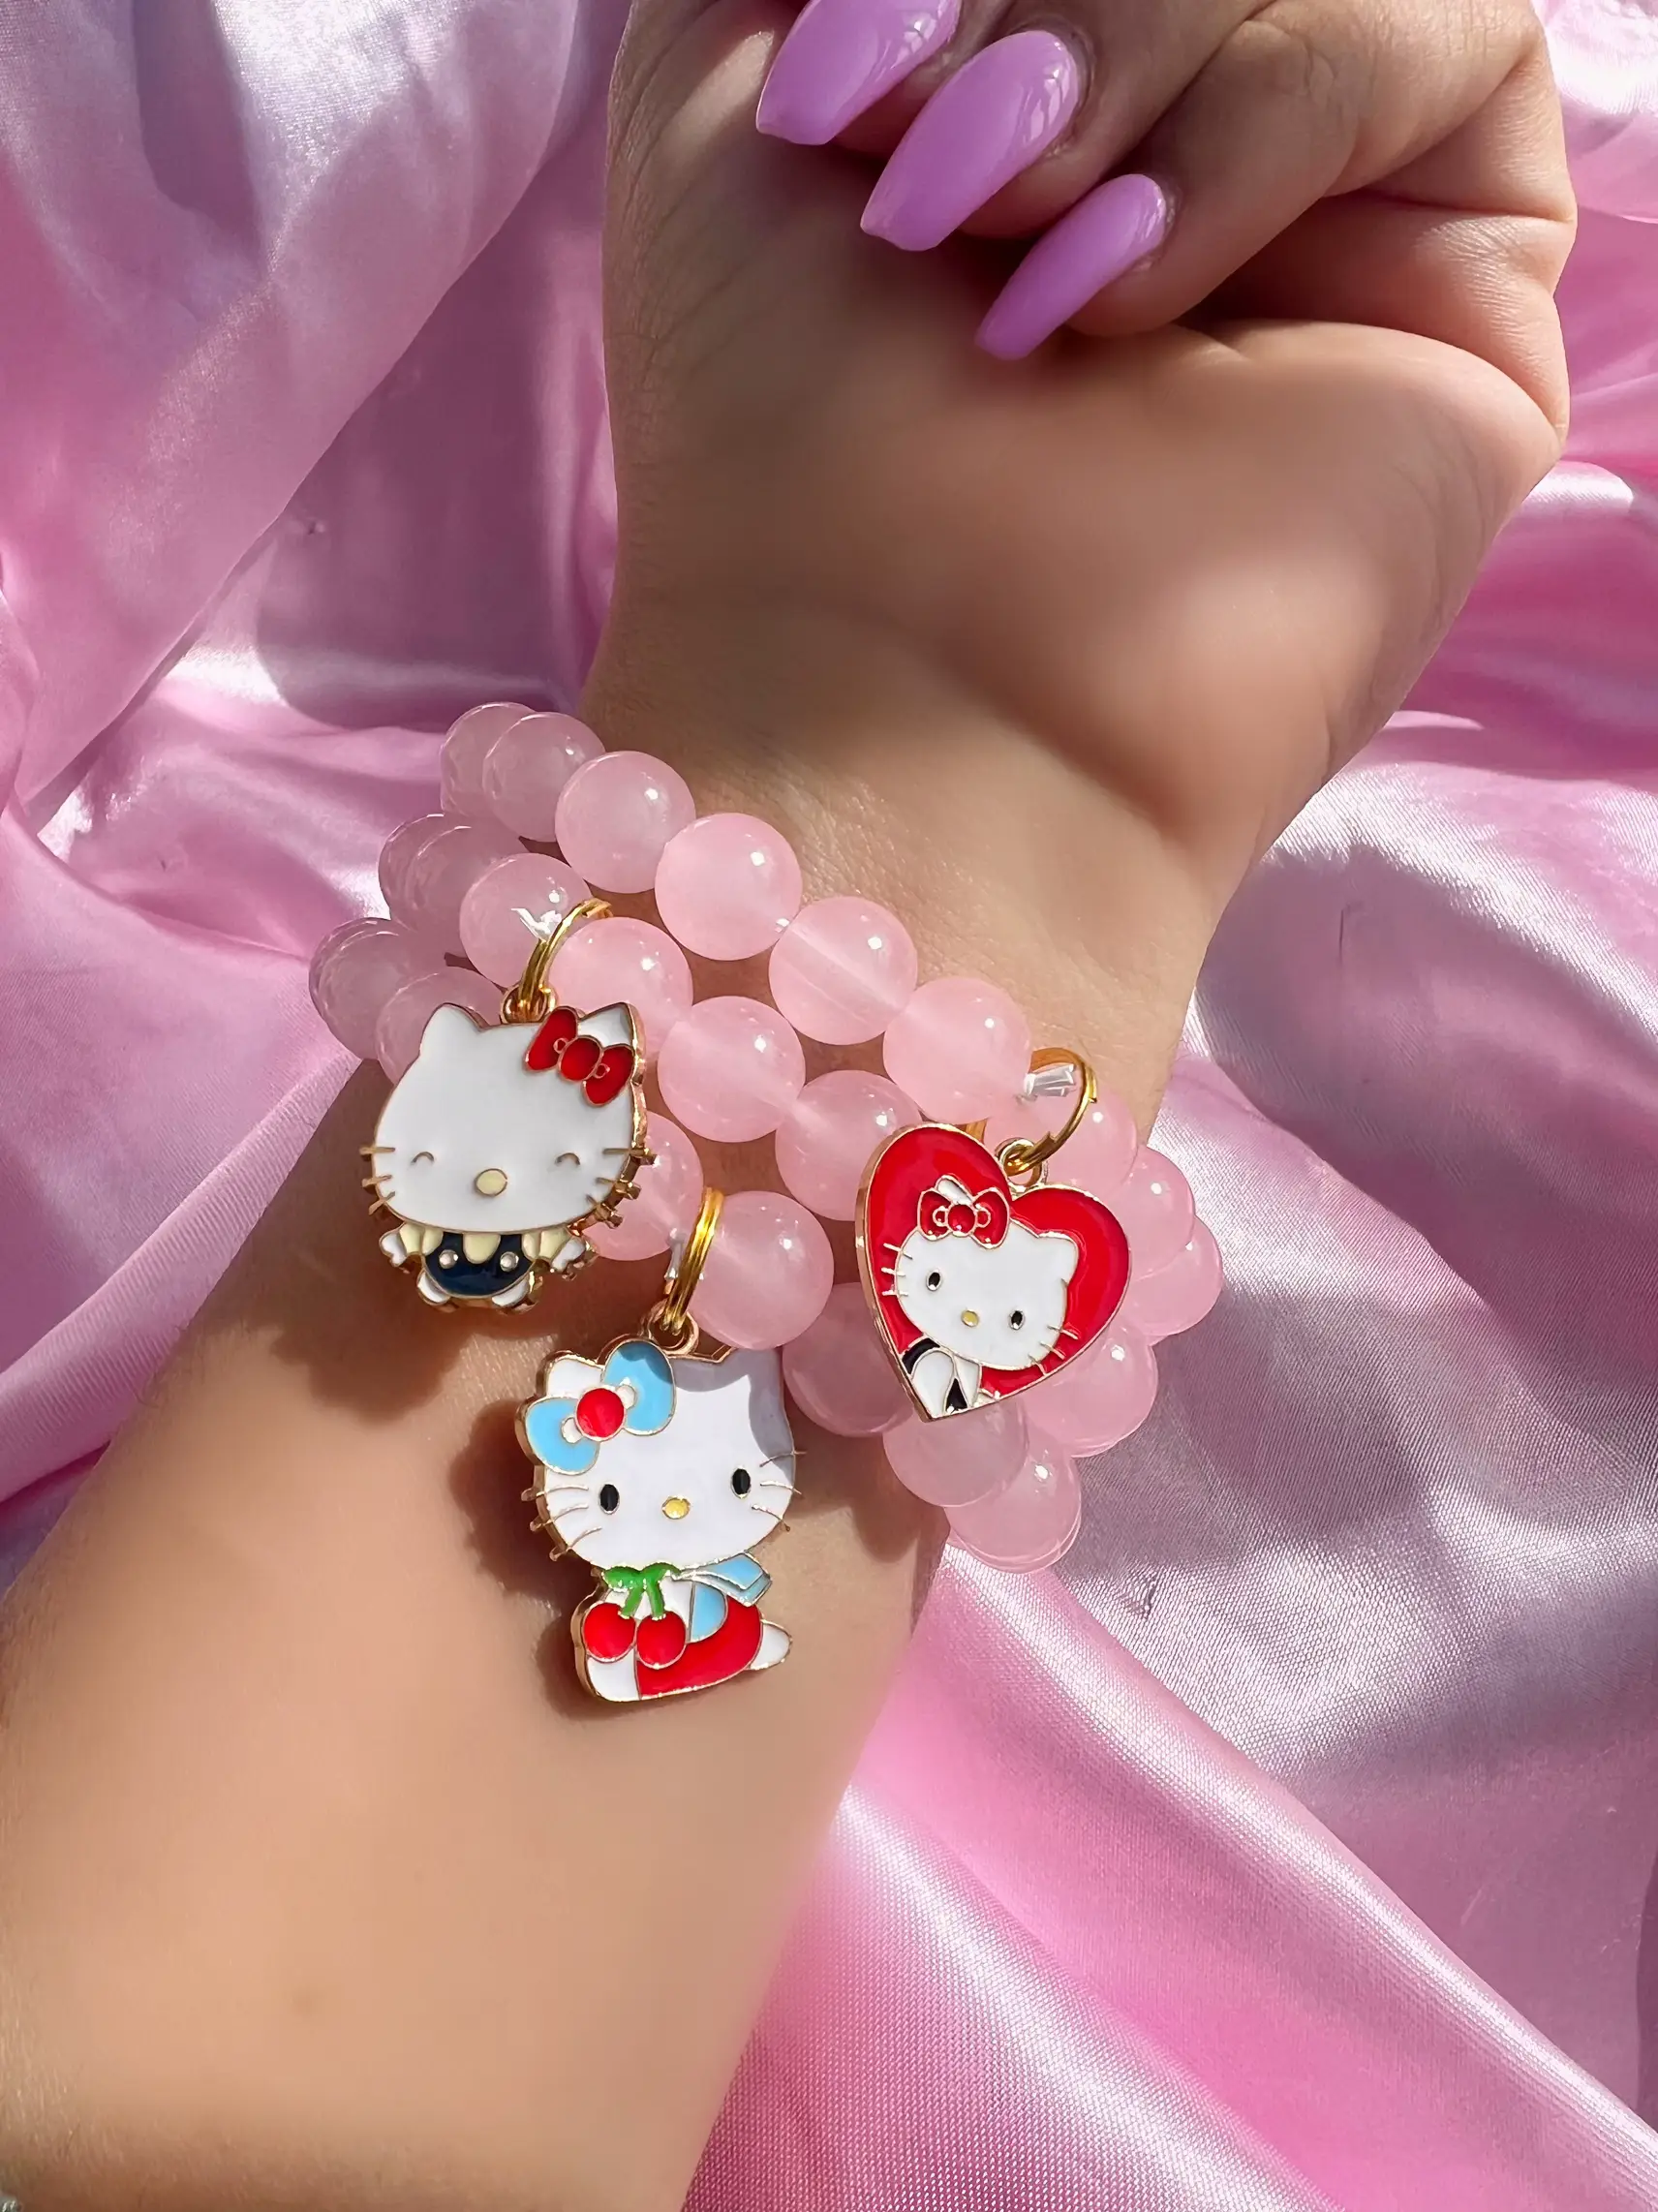 Hello kitty red charms glass beaded bracelets 🫶